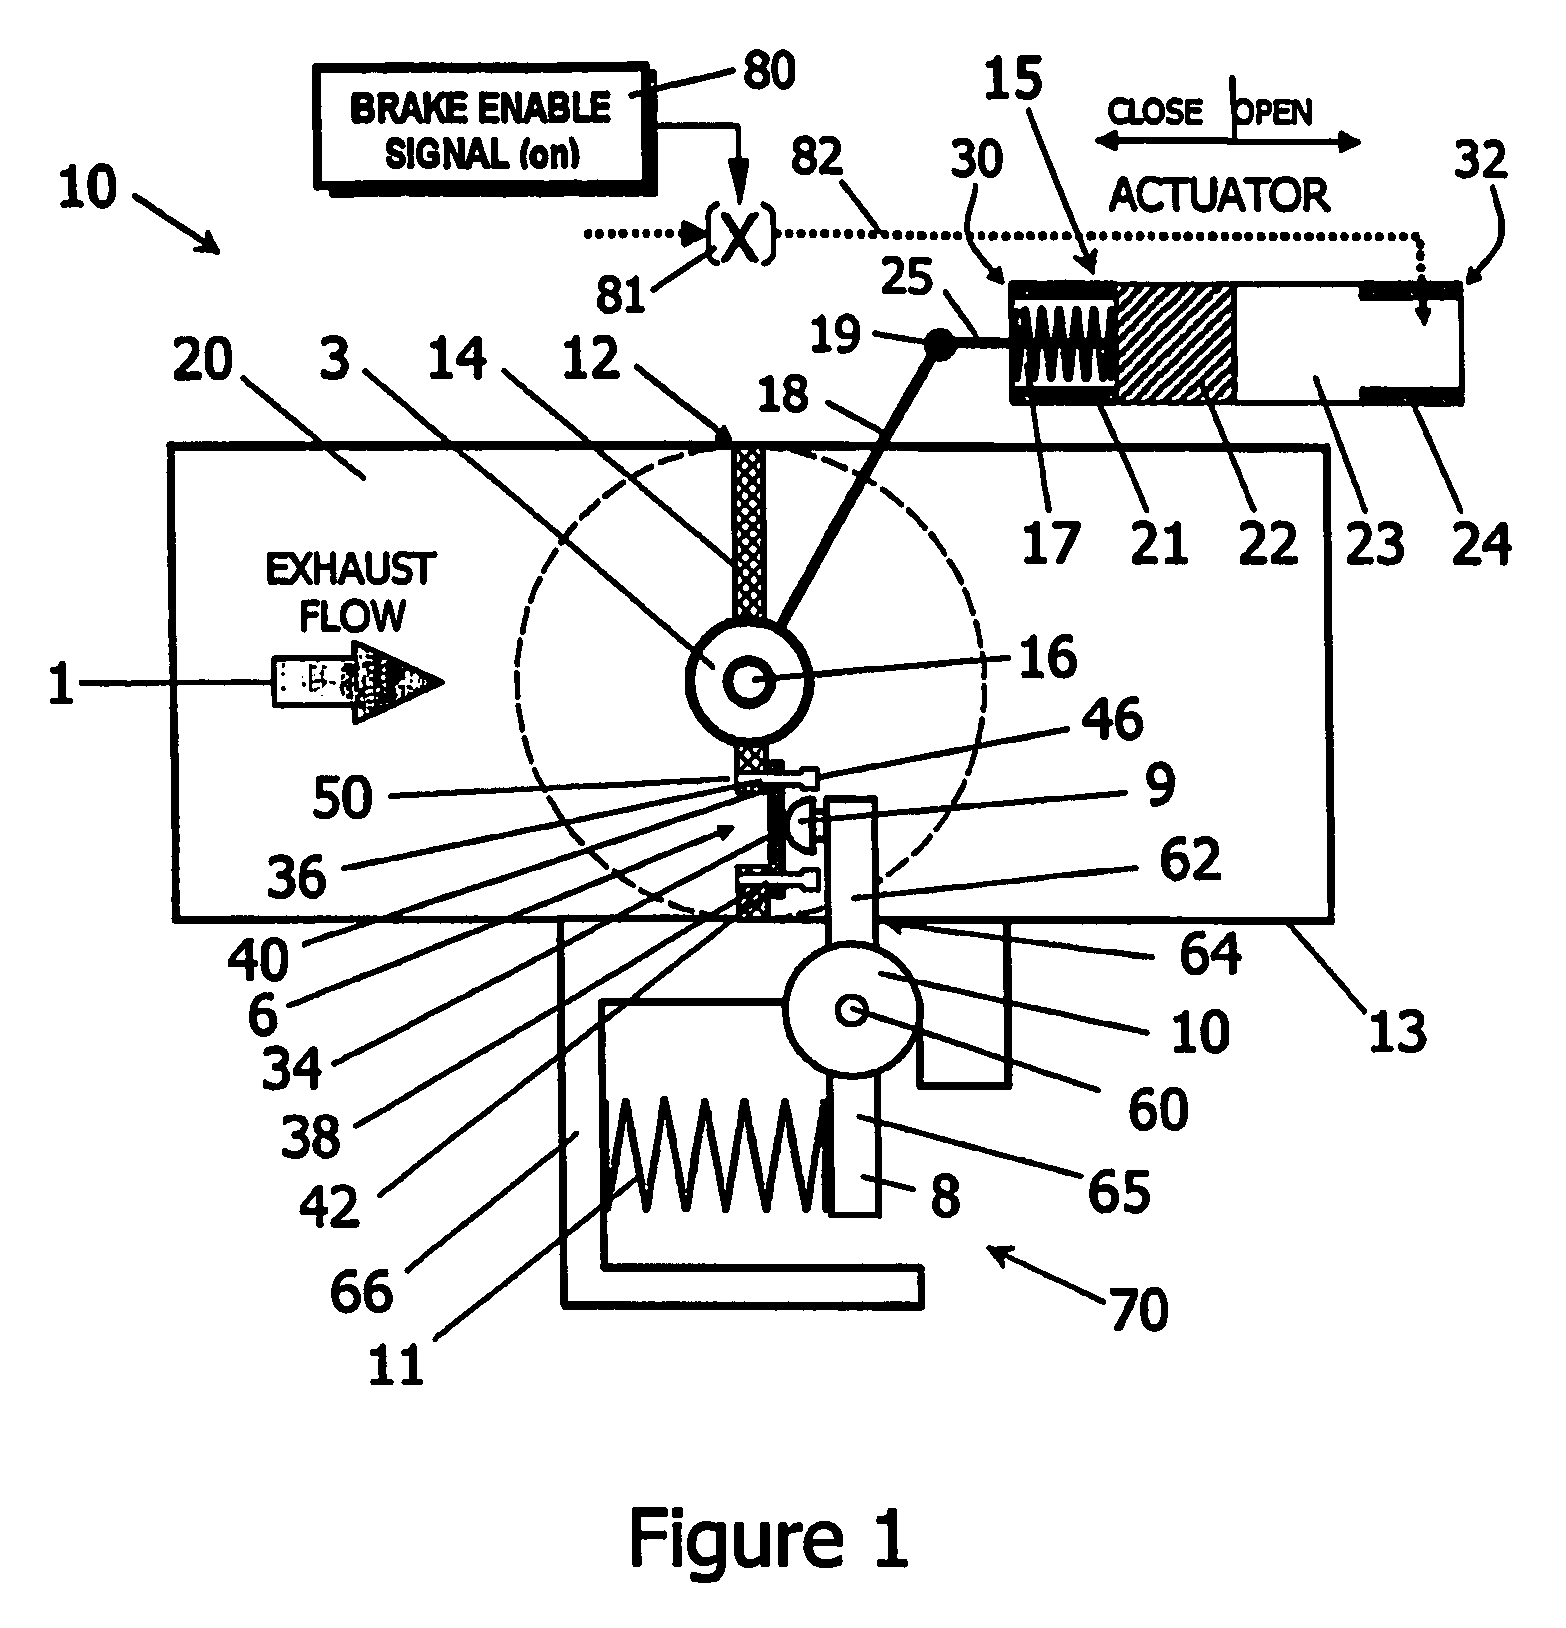 Apparatus and method for pressure relief in an exhaust brake